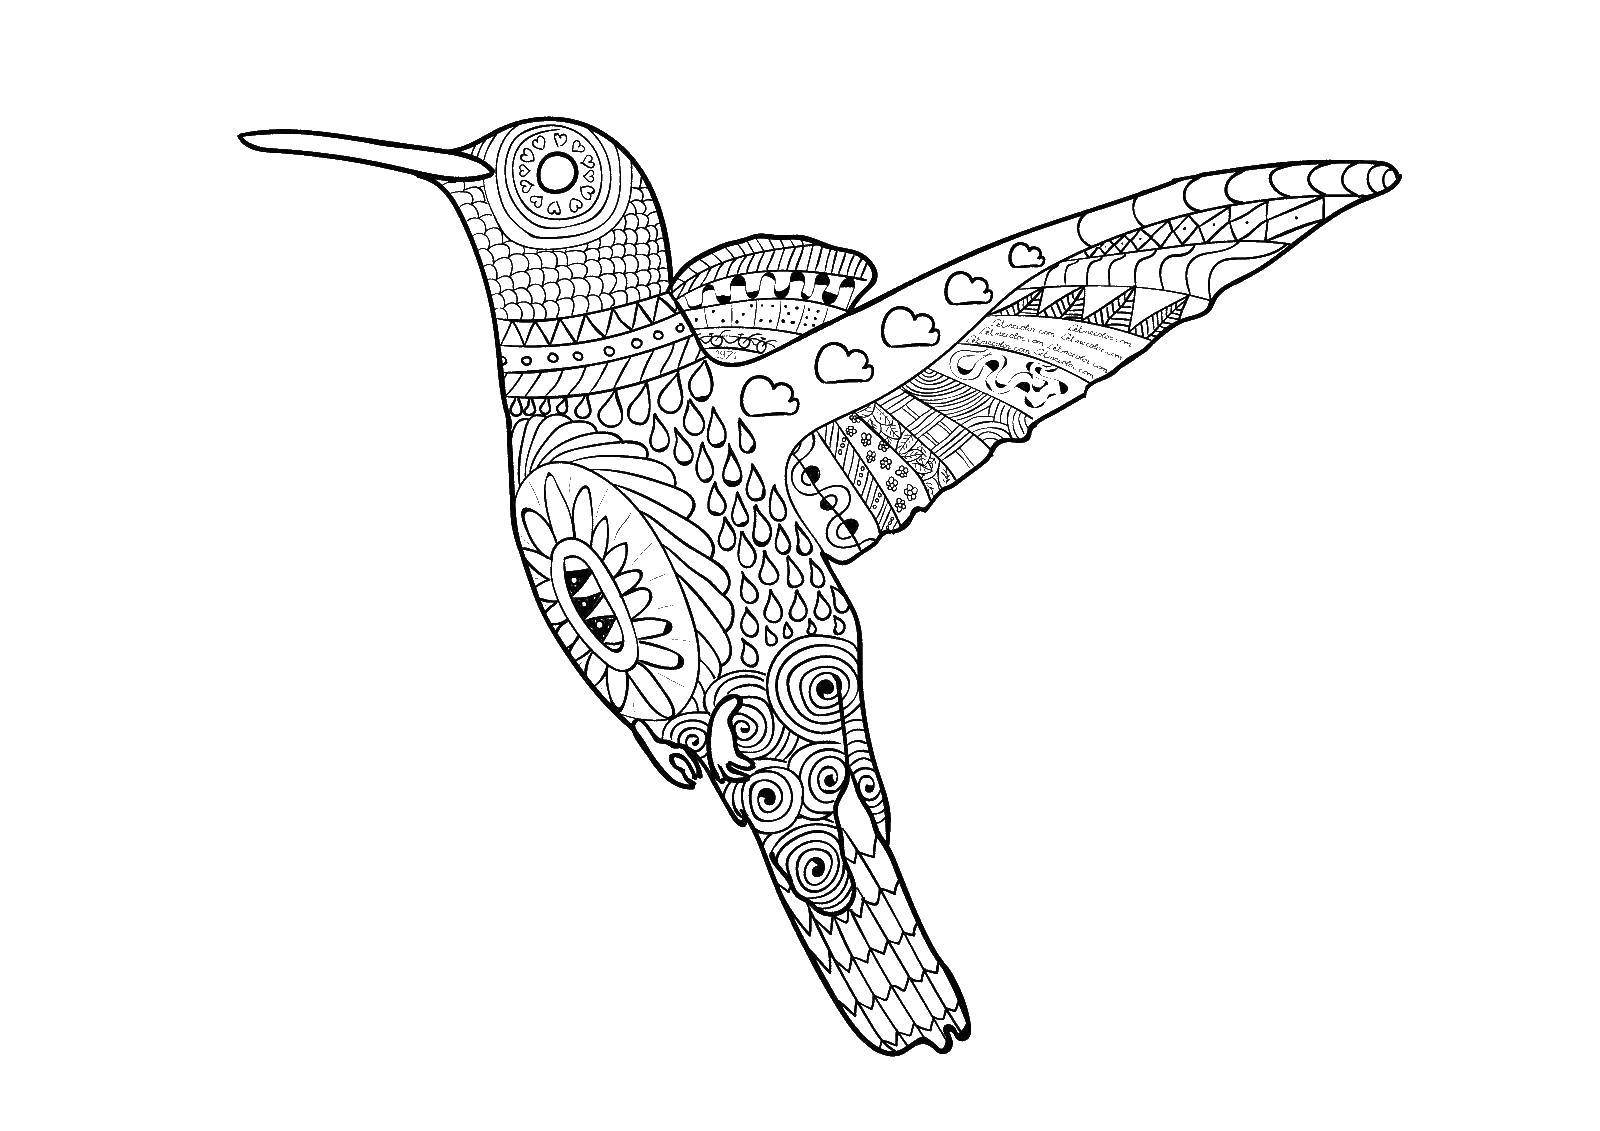 Coloring Patterned Hummingbird. Category patterns. Tags:  Patterns, animals.